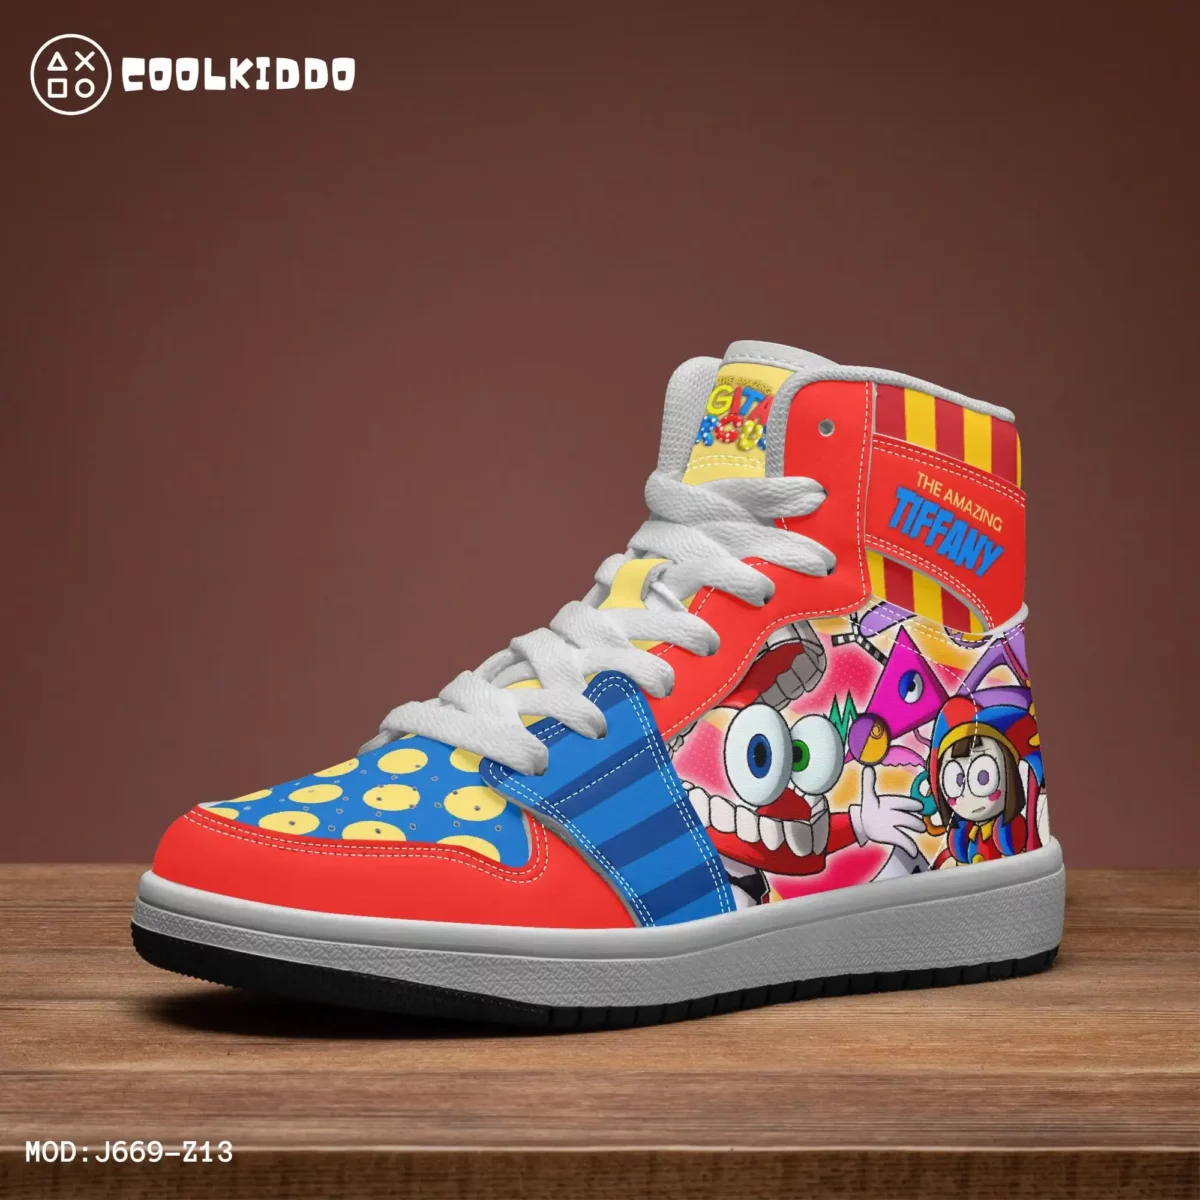 Personalized Name The Amazing Digital Circus Inspired High-Top Shoes, Leather Sneakers for Kids Cool Kiddo 18